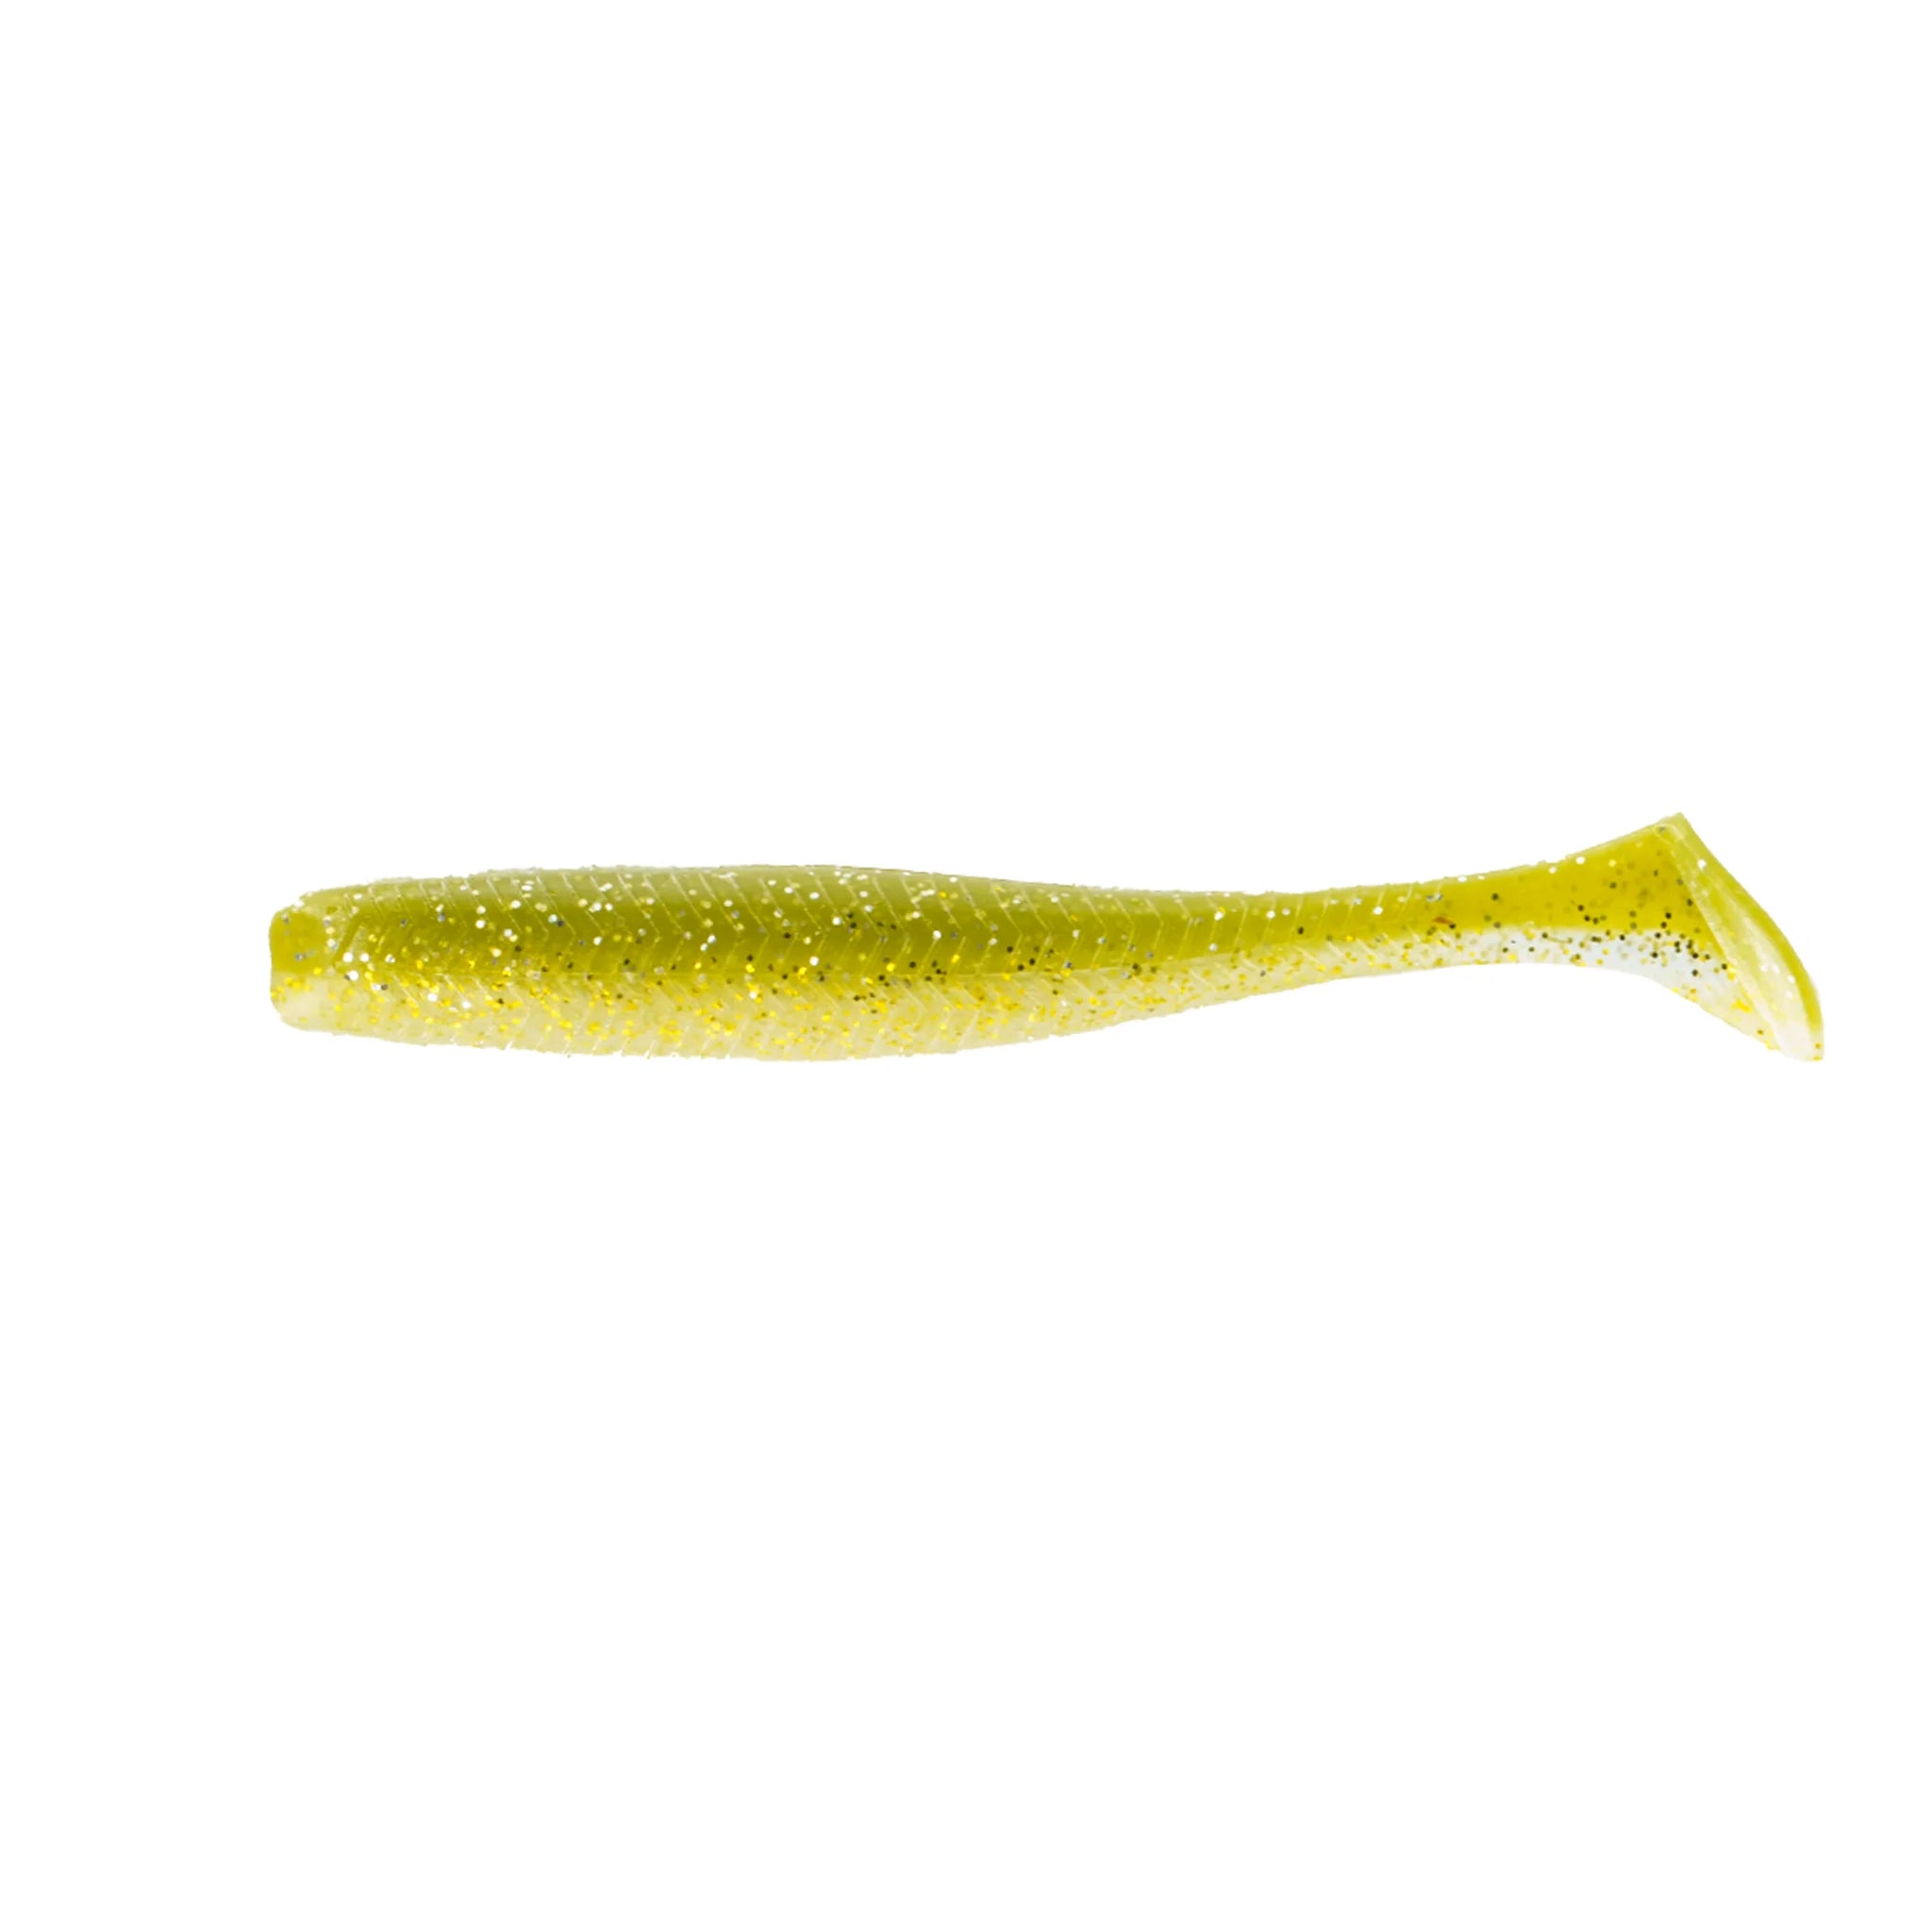 Soft Lure Worm 10mm Fishing Soft Plastic Bait Grub Bass Tackle Lures W/box  DD for sale online